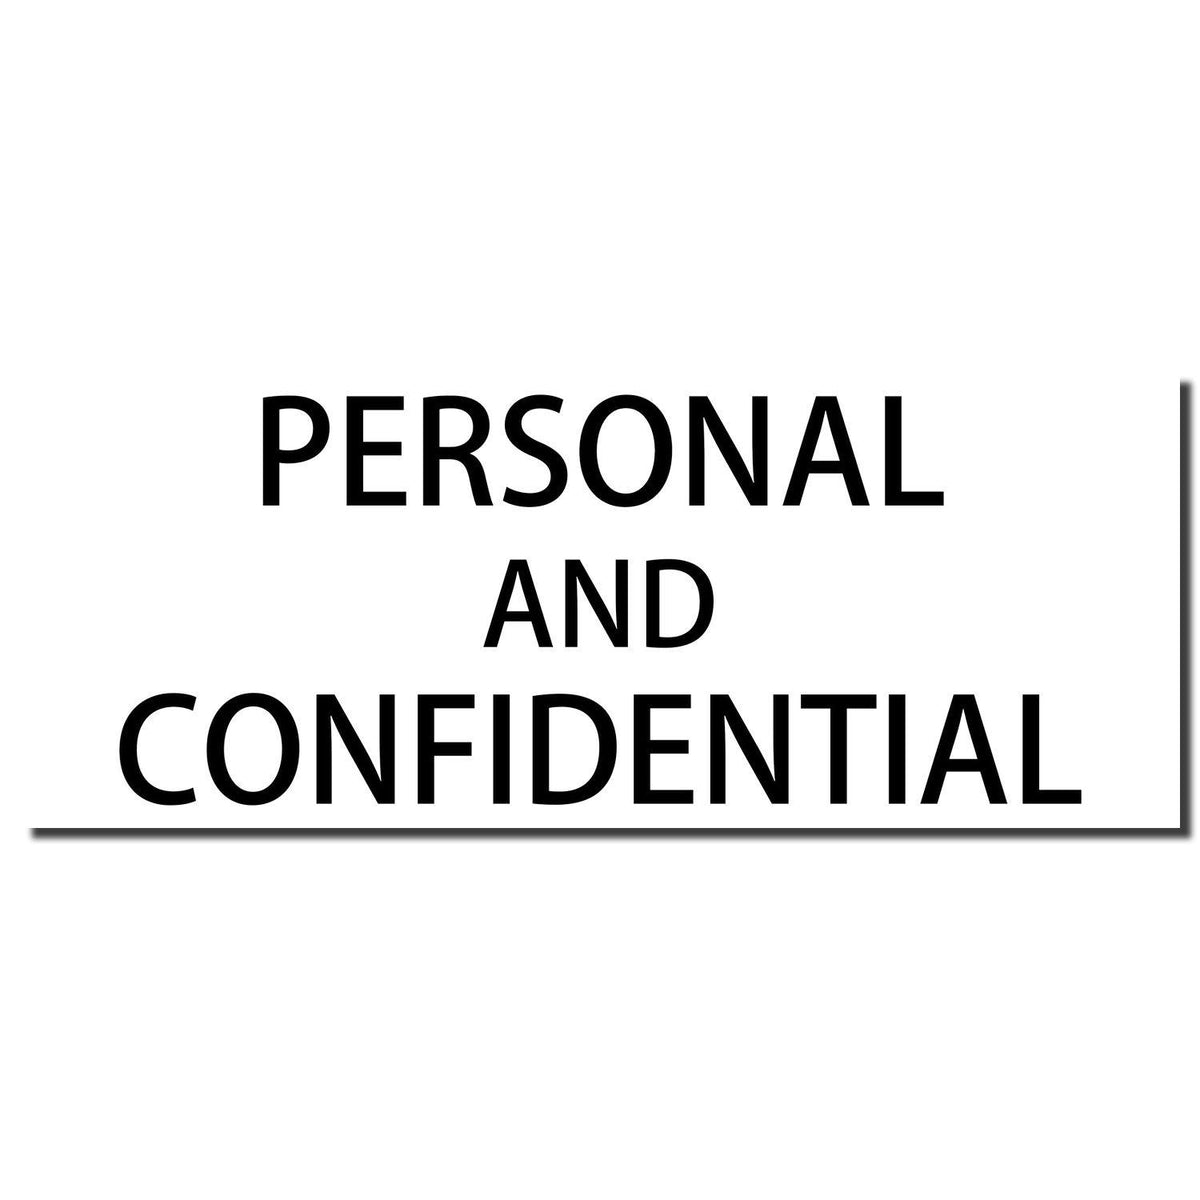 Enlarged Imprint Large Personal Confidential Rubber Stamp Sample